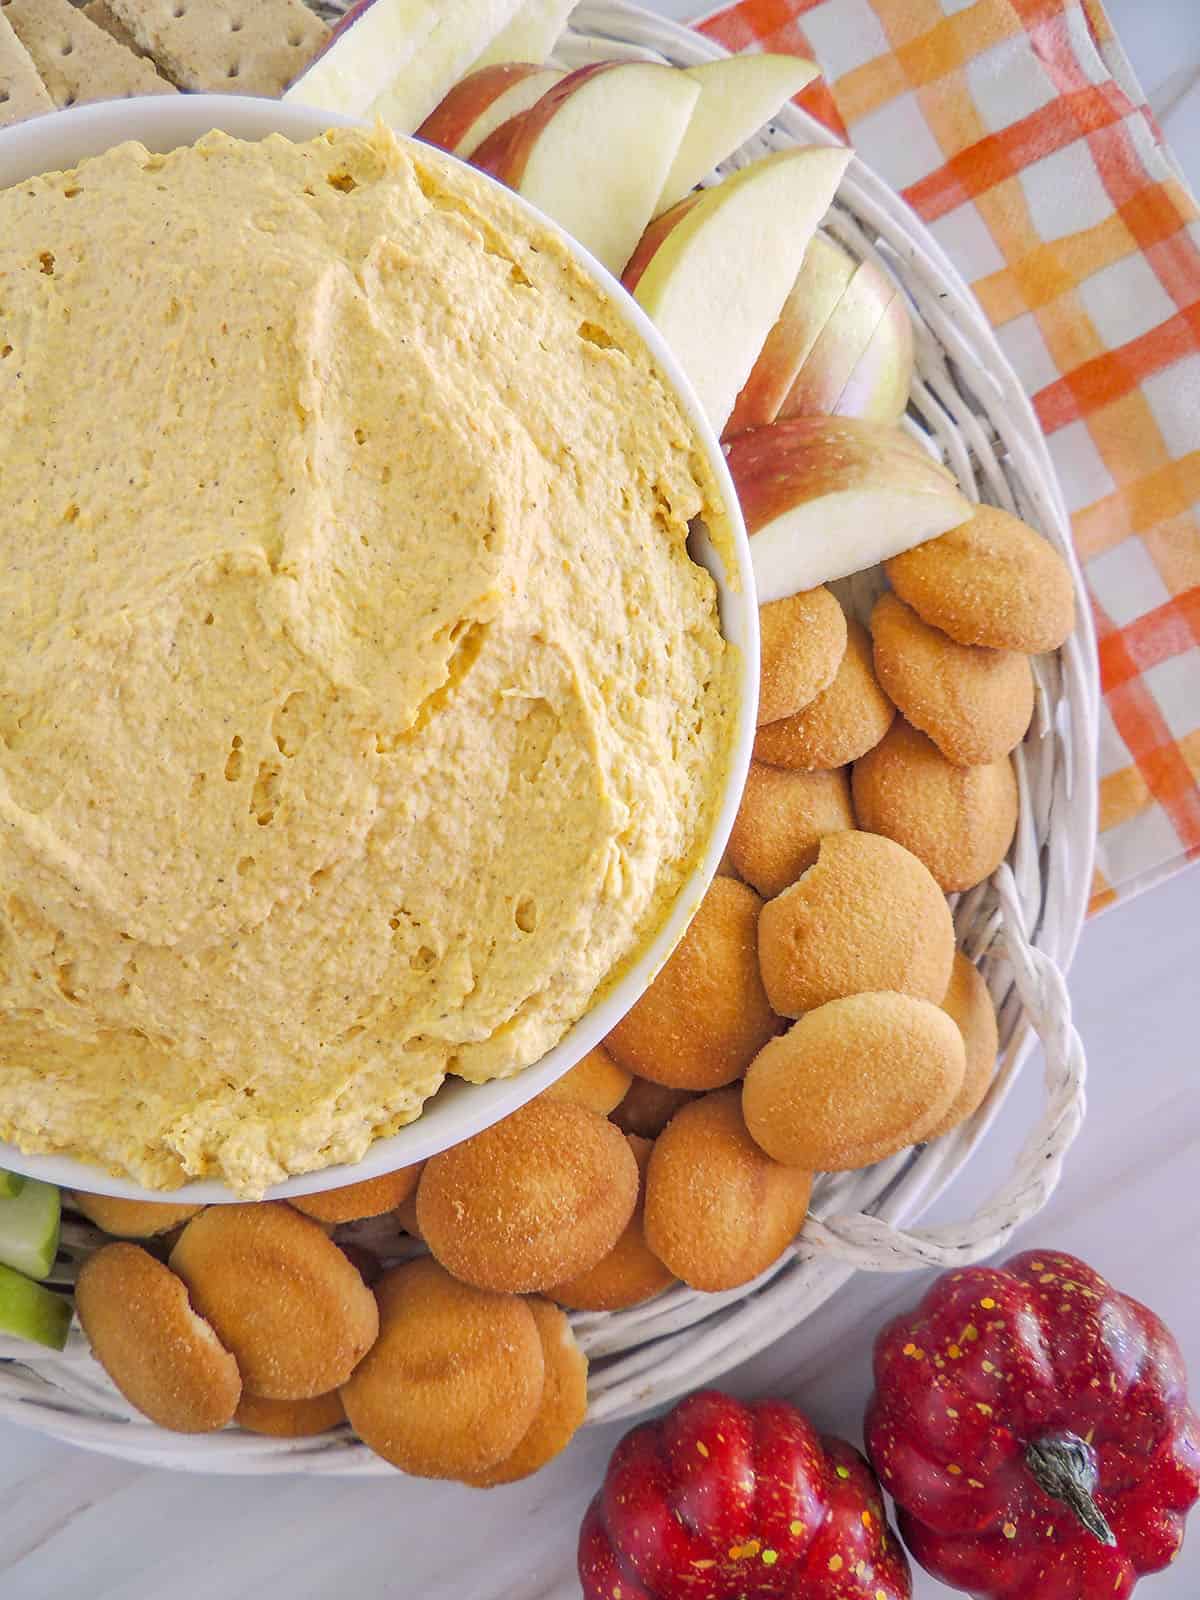 The pumpkin dip on the left with apple slices and nilla cookies on a basket underneath the dip. 